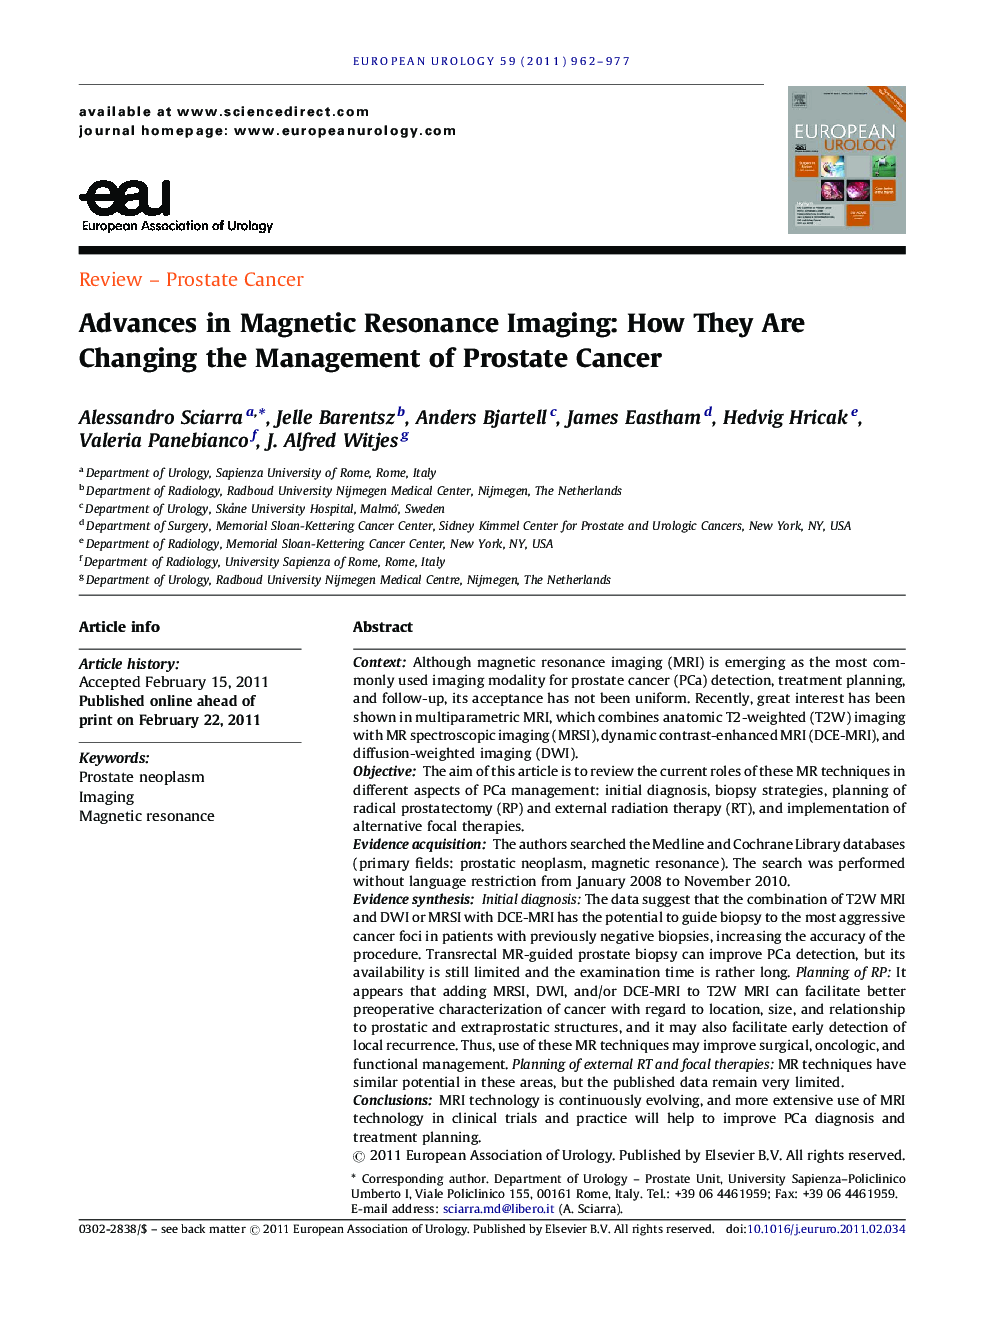 Advances in Magnetic Resonance Imaging: How They Are Changing the Management of Prostate Cancer